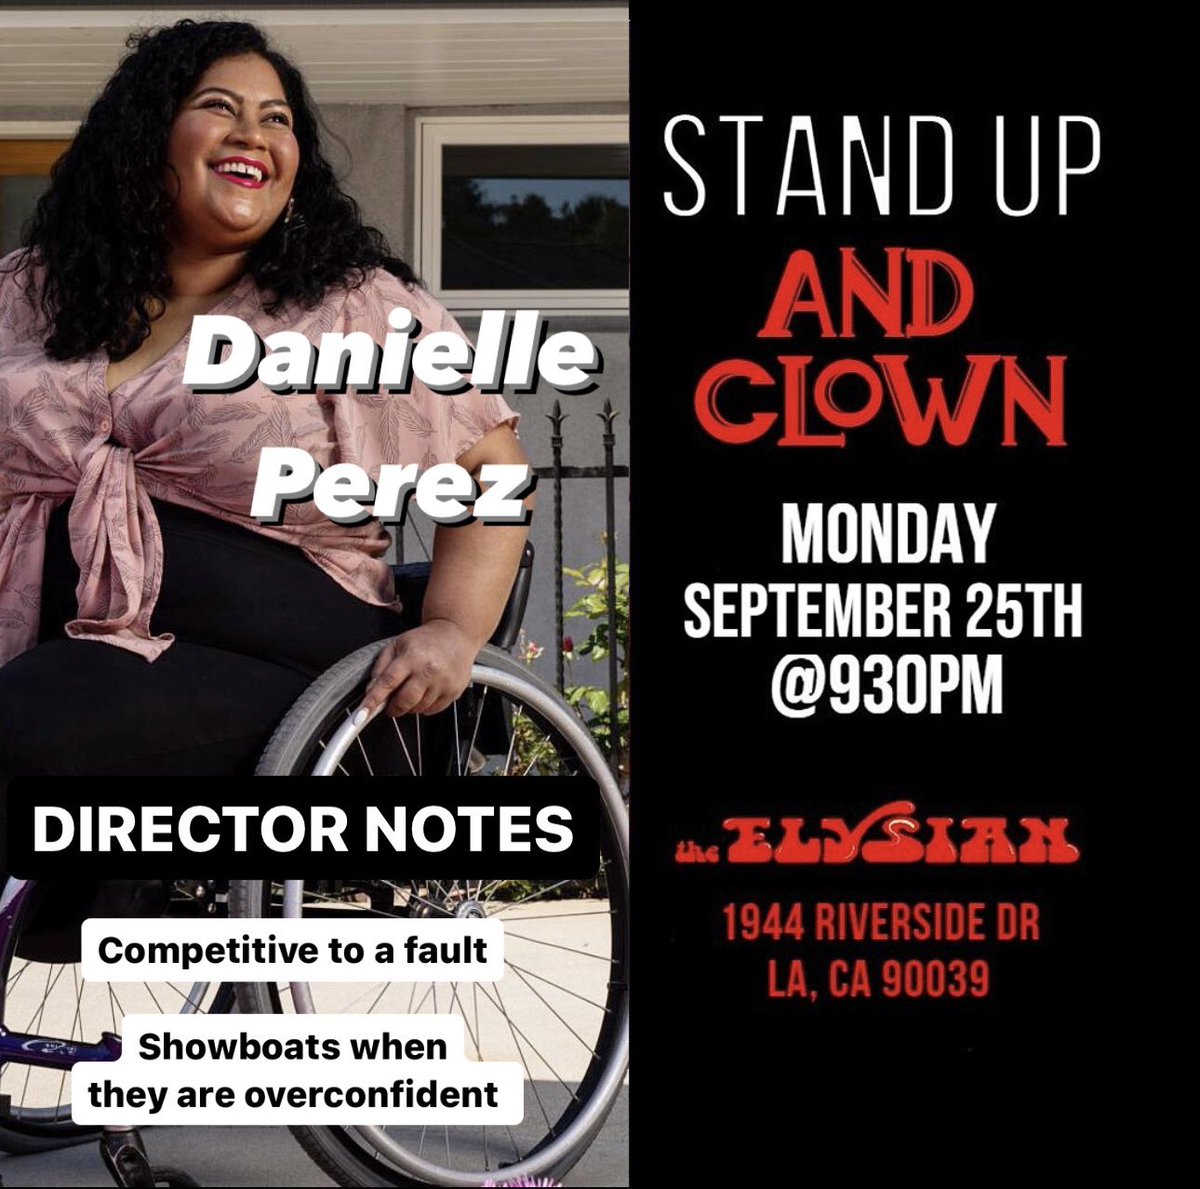 THIS MONDAY! 930! @ElysianTheater Very excited for this STAND UP AND CLOWN lineup! Come see comics do clown work under my ruthless direction: @DylanAdler6 @DivaDelux @LiamCullagh @Notbaddon tinyurl.com/ypsk378u